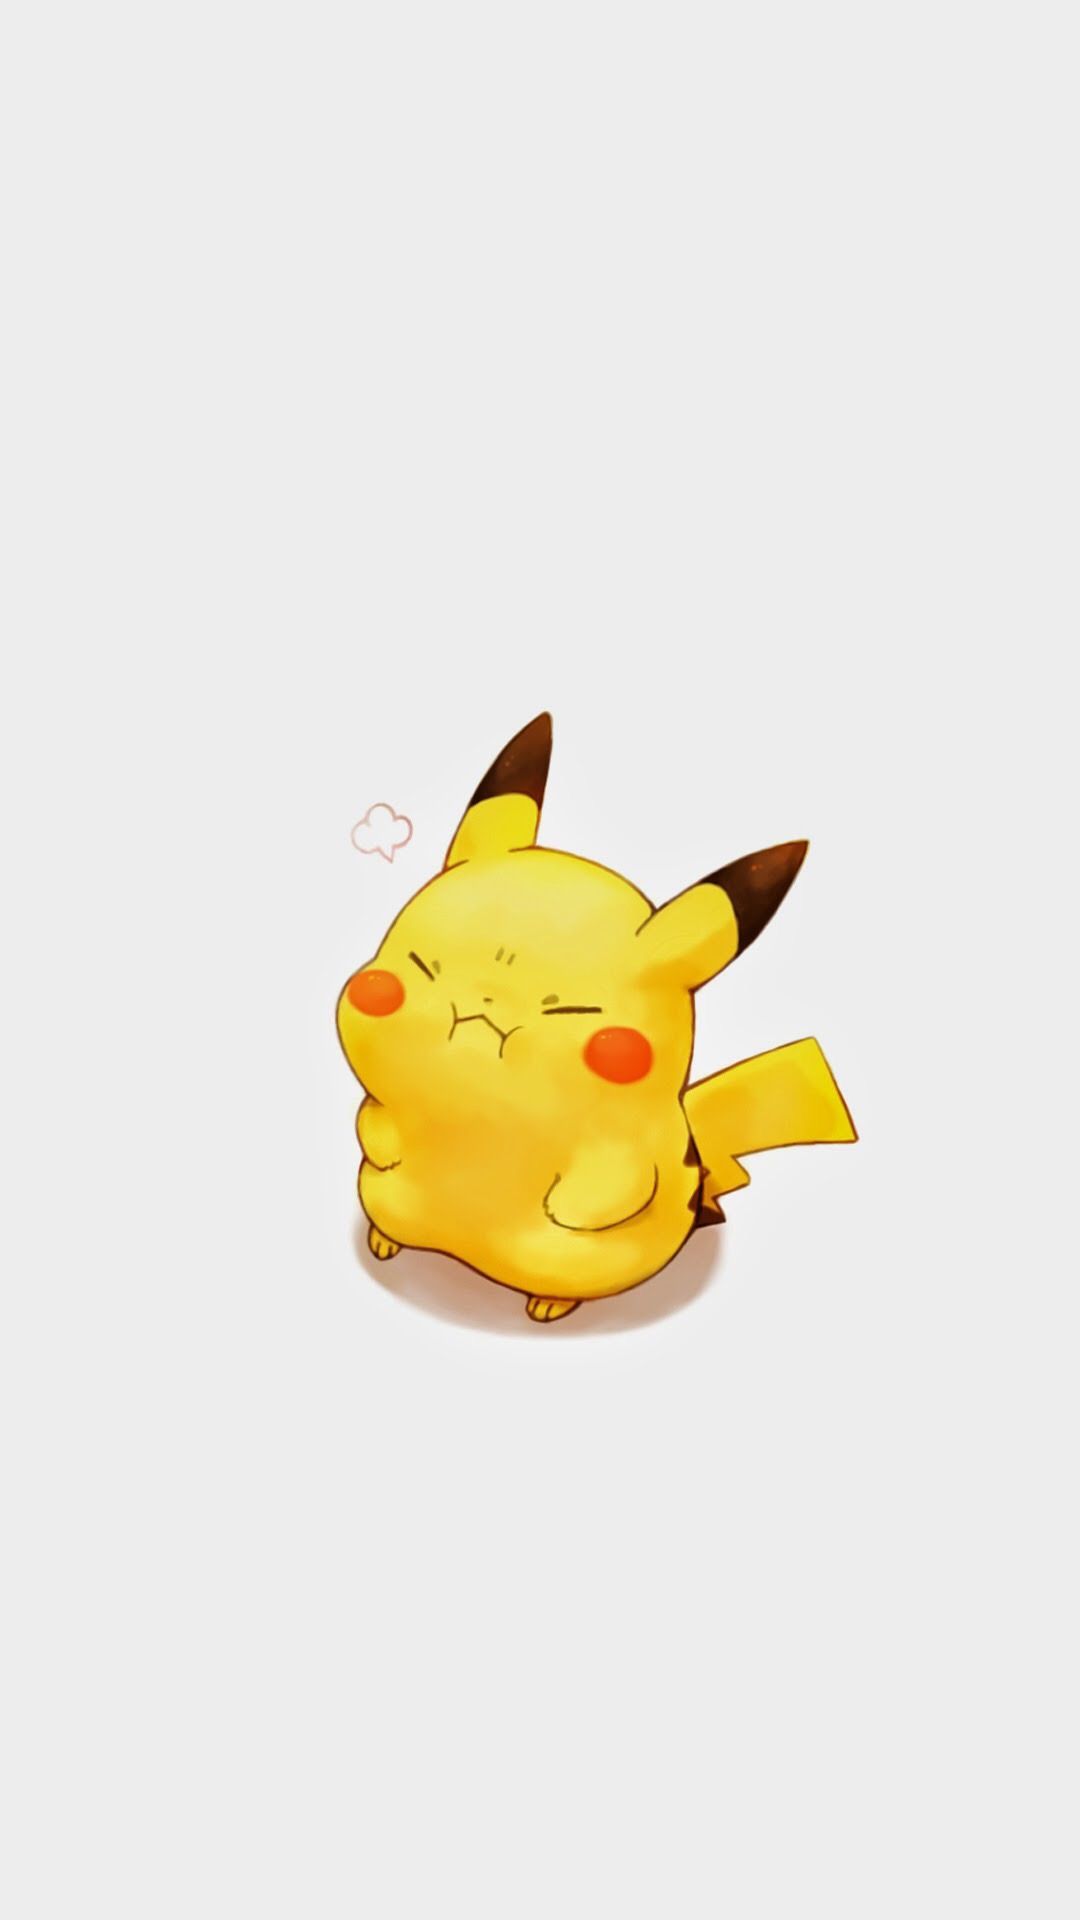 IPhone wallpaper of Pikachu sleeping with a heart coming out of his behind. - Pikachu